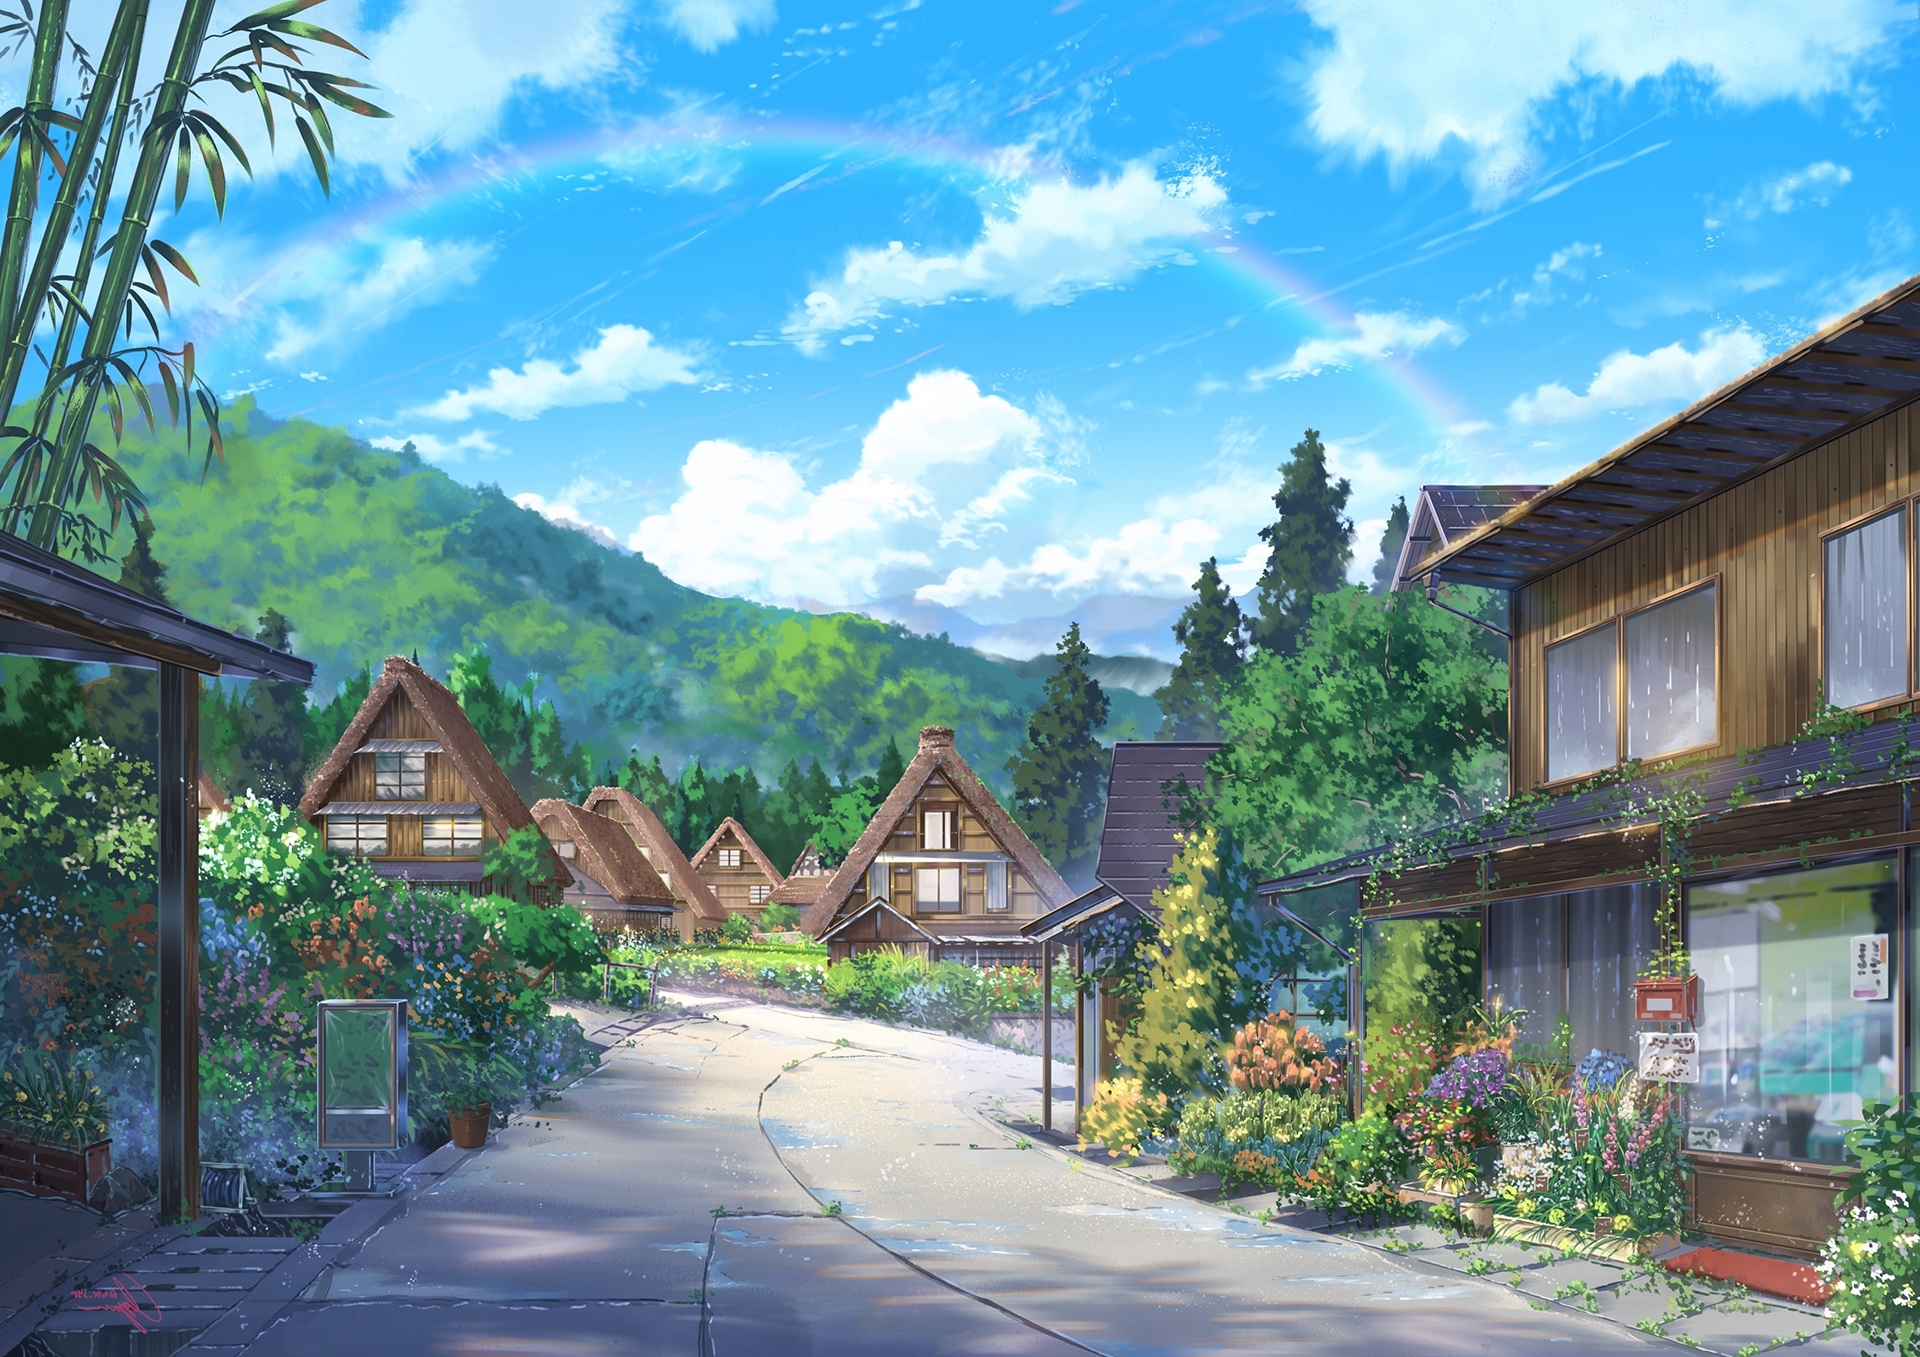 Studio ghibli, high definition anime cozy countryside house, with a stone  path leading up to it, located in a wide open field of green grass and  colorful wild flowers, lots of trees,